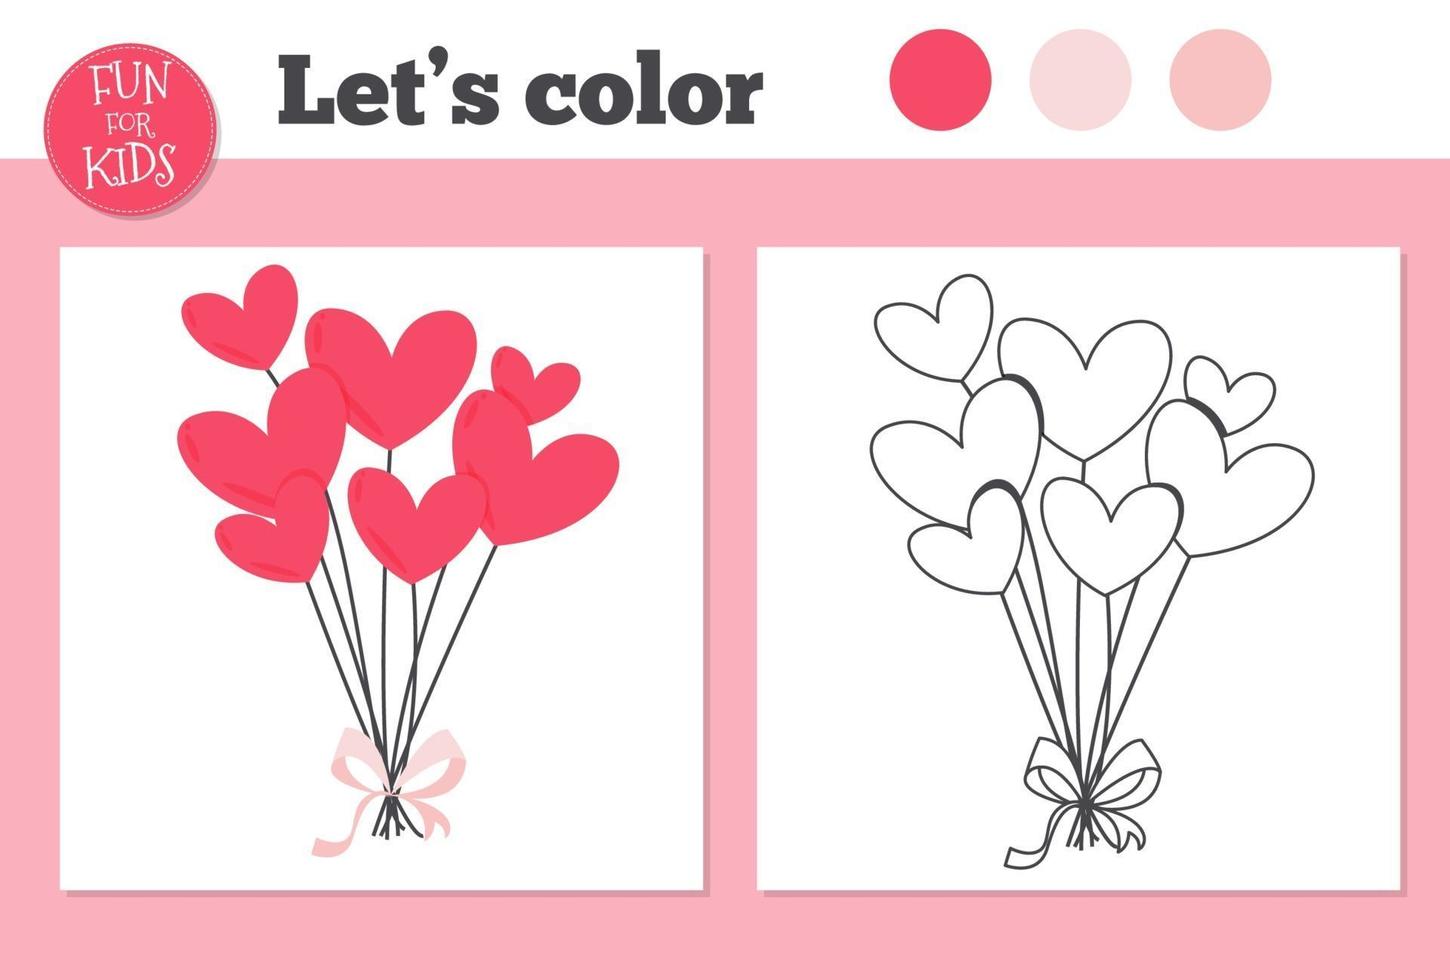 Coloring book heart balloons for preschool kids with easy educational gaming level. vector